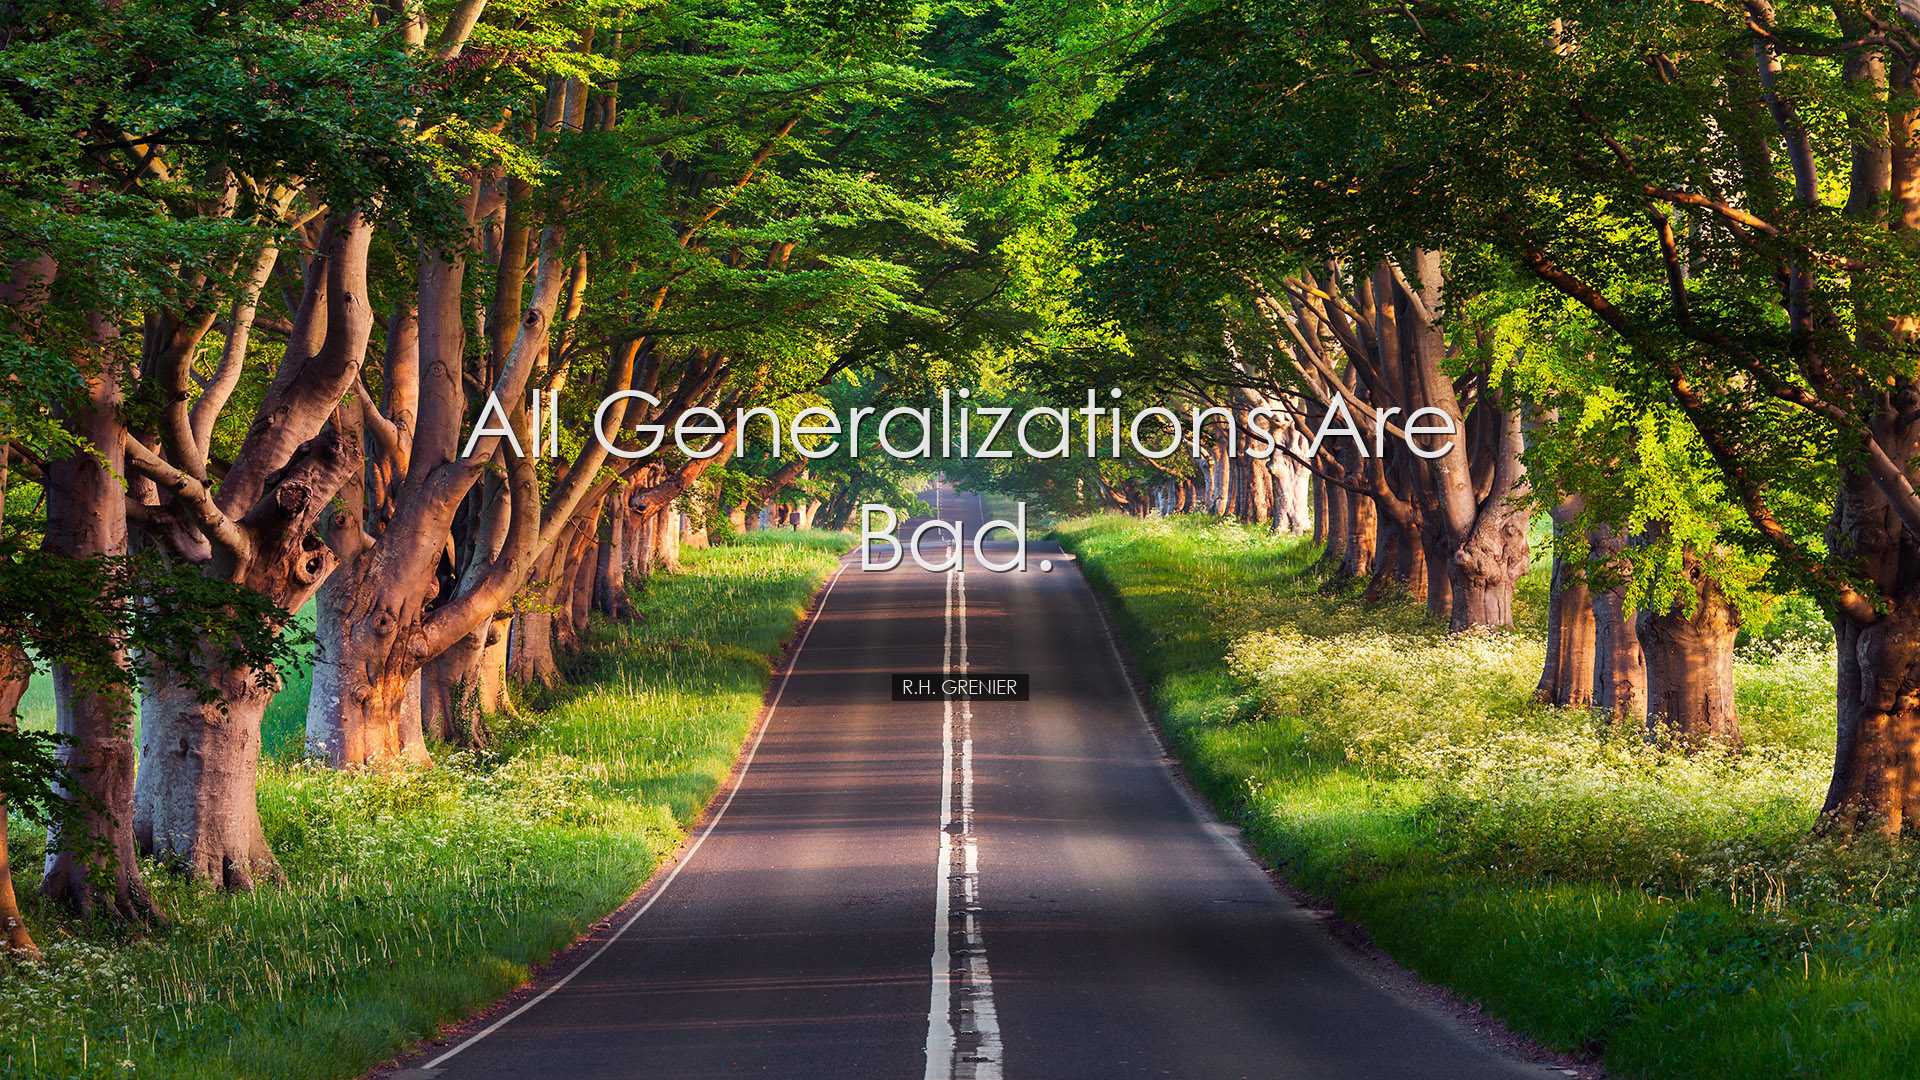 All generalizations are bad. - R.H. Grenier